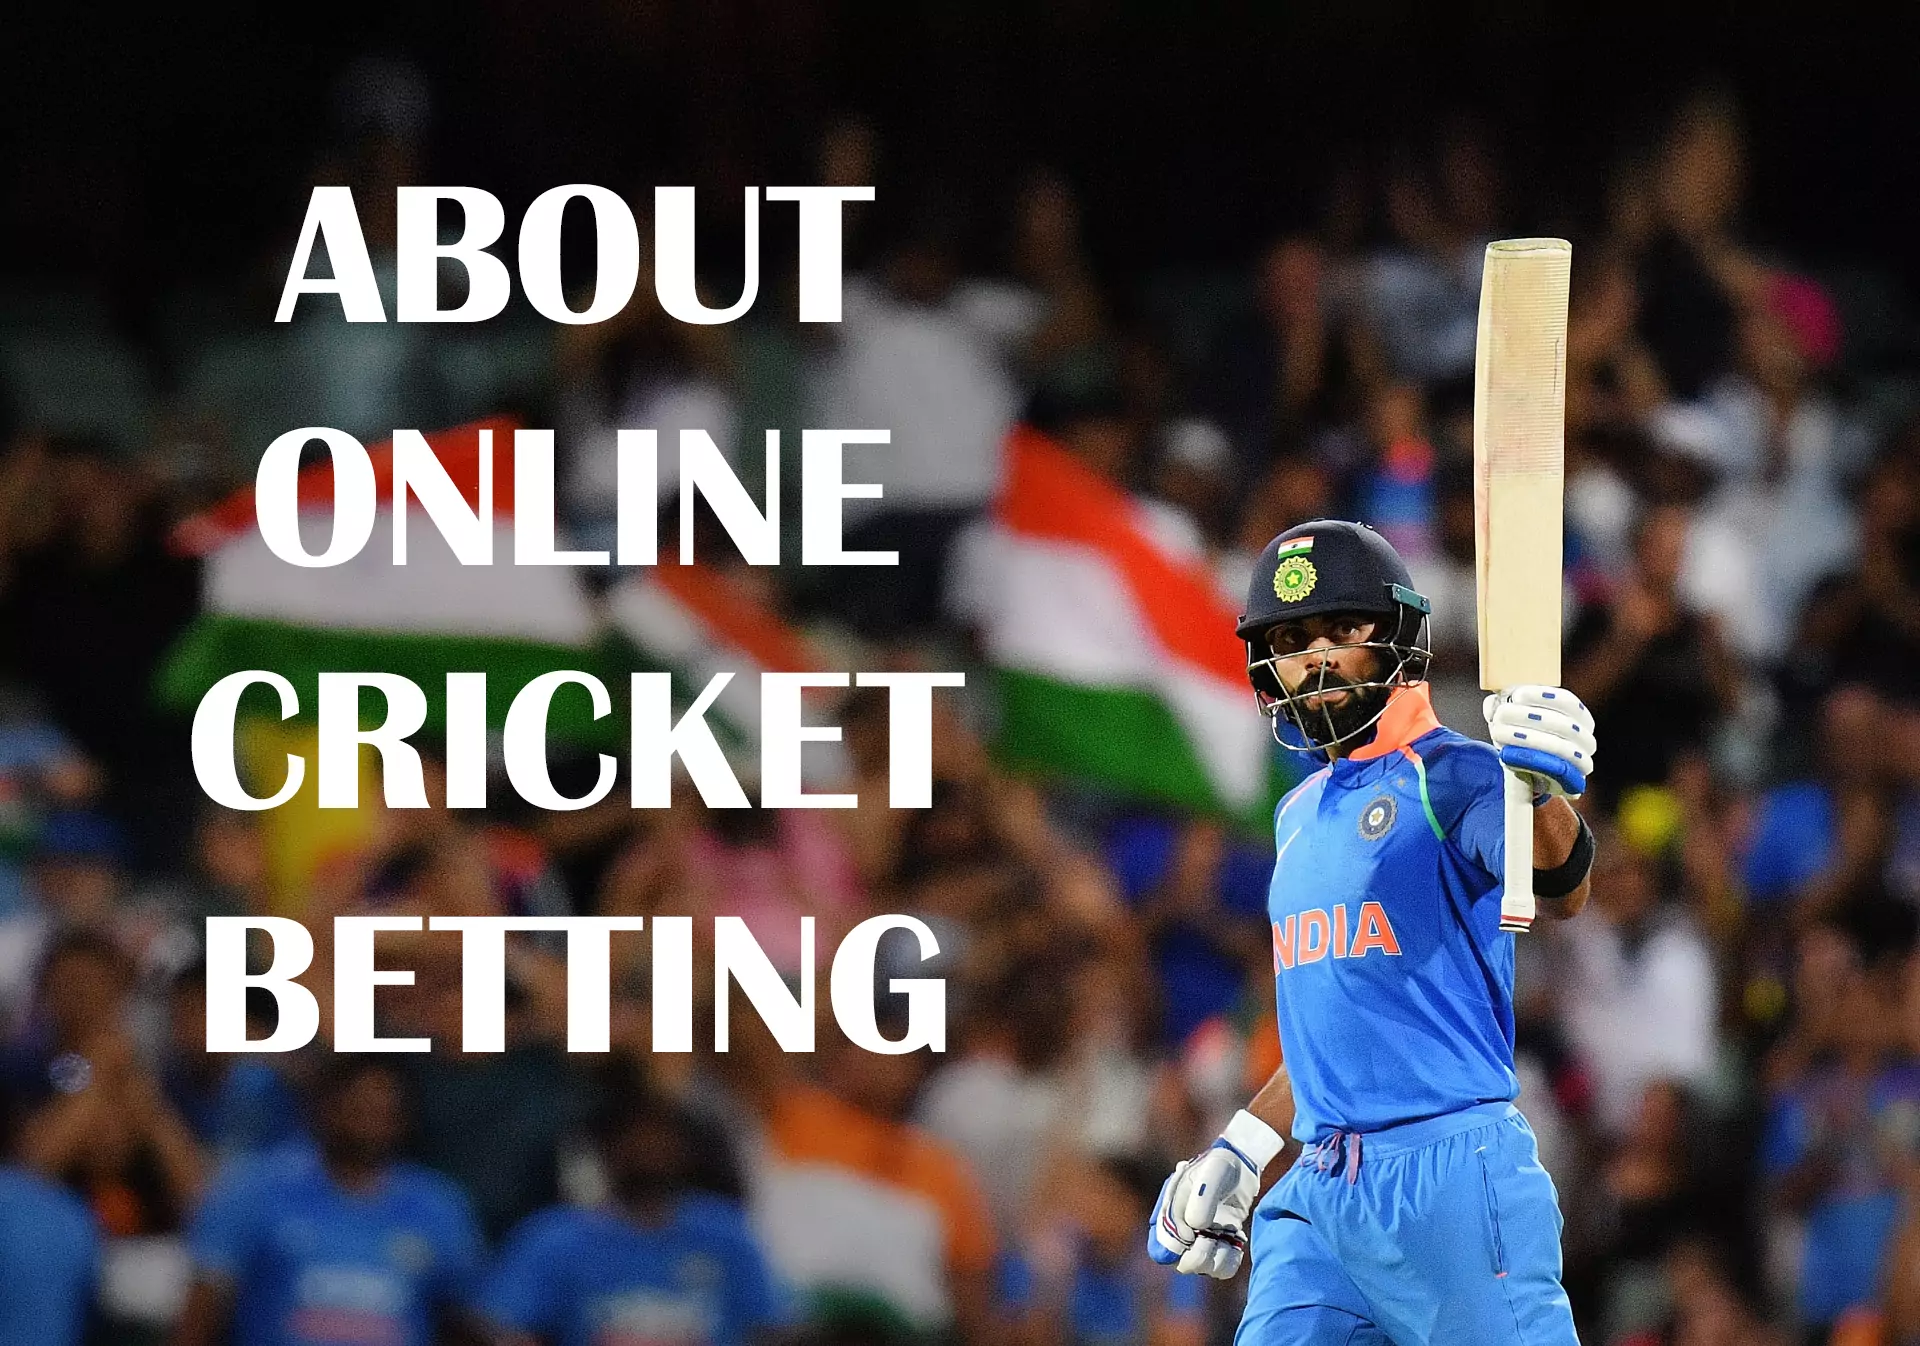 Betting on cricket is a popular hobby in India.